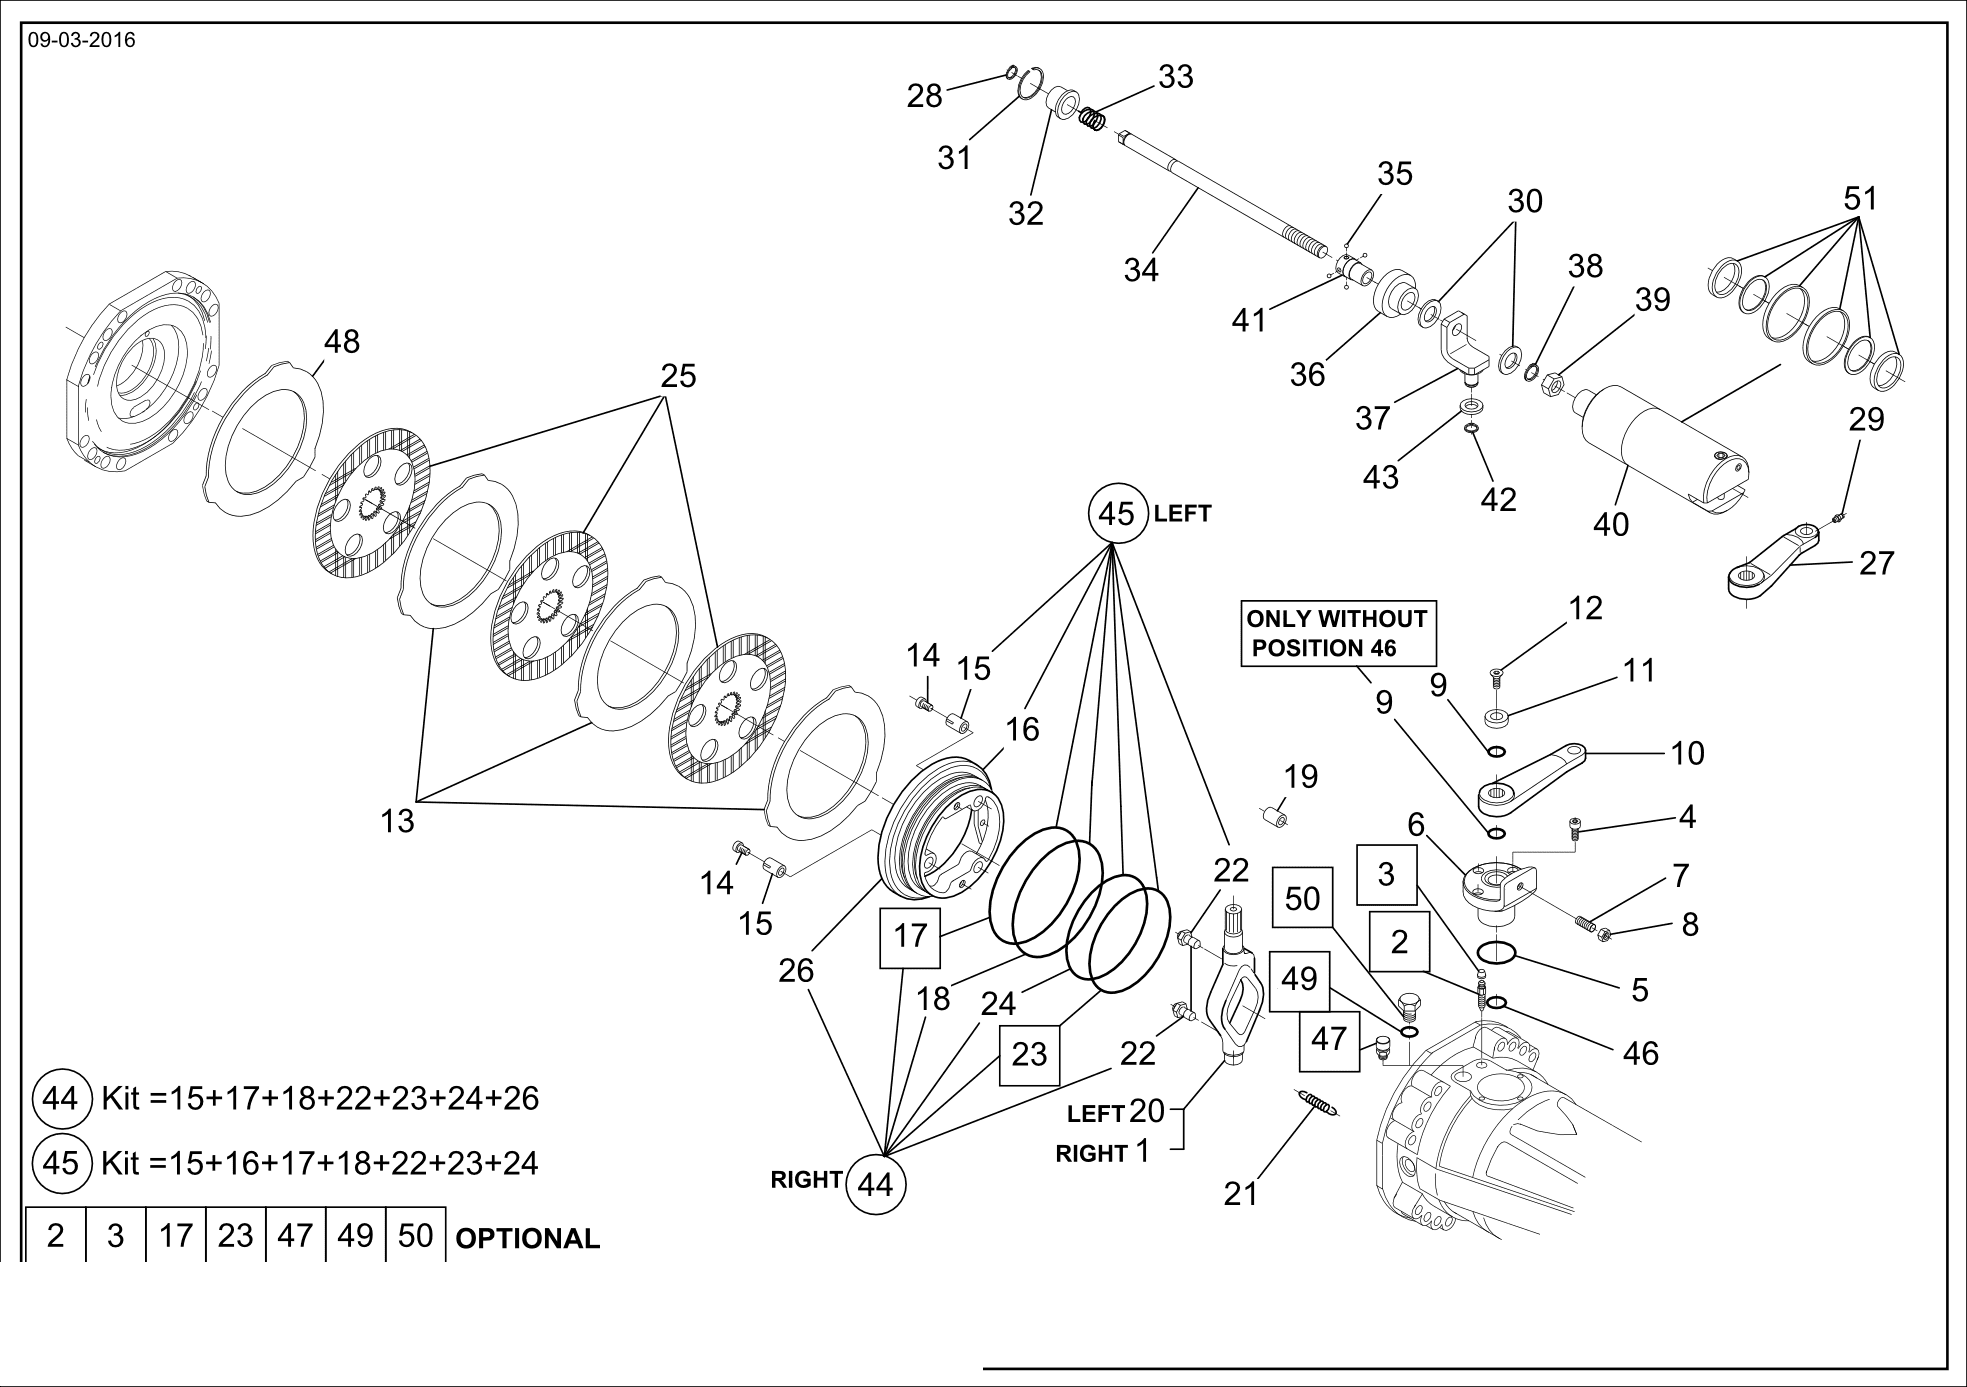 drawing for GHH 1202-0102 - BRAKE CAM (figure 4)